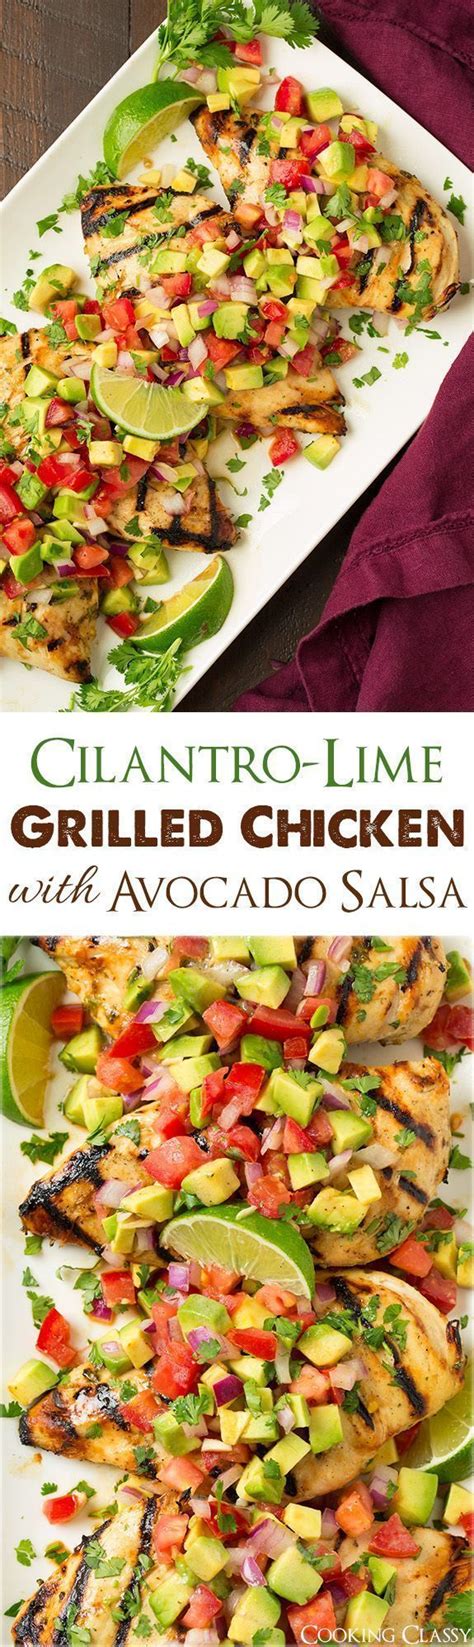 Prepare tasty and fresh grilled cilantro lime chicken with corn salsa and lime crema. Grilled Cilantro Lime Chicken with Avocado Salsa - easy to ...